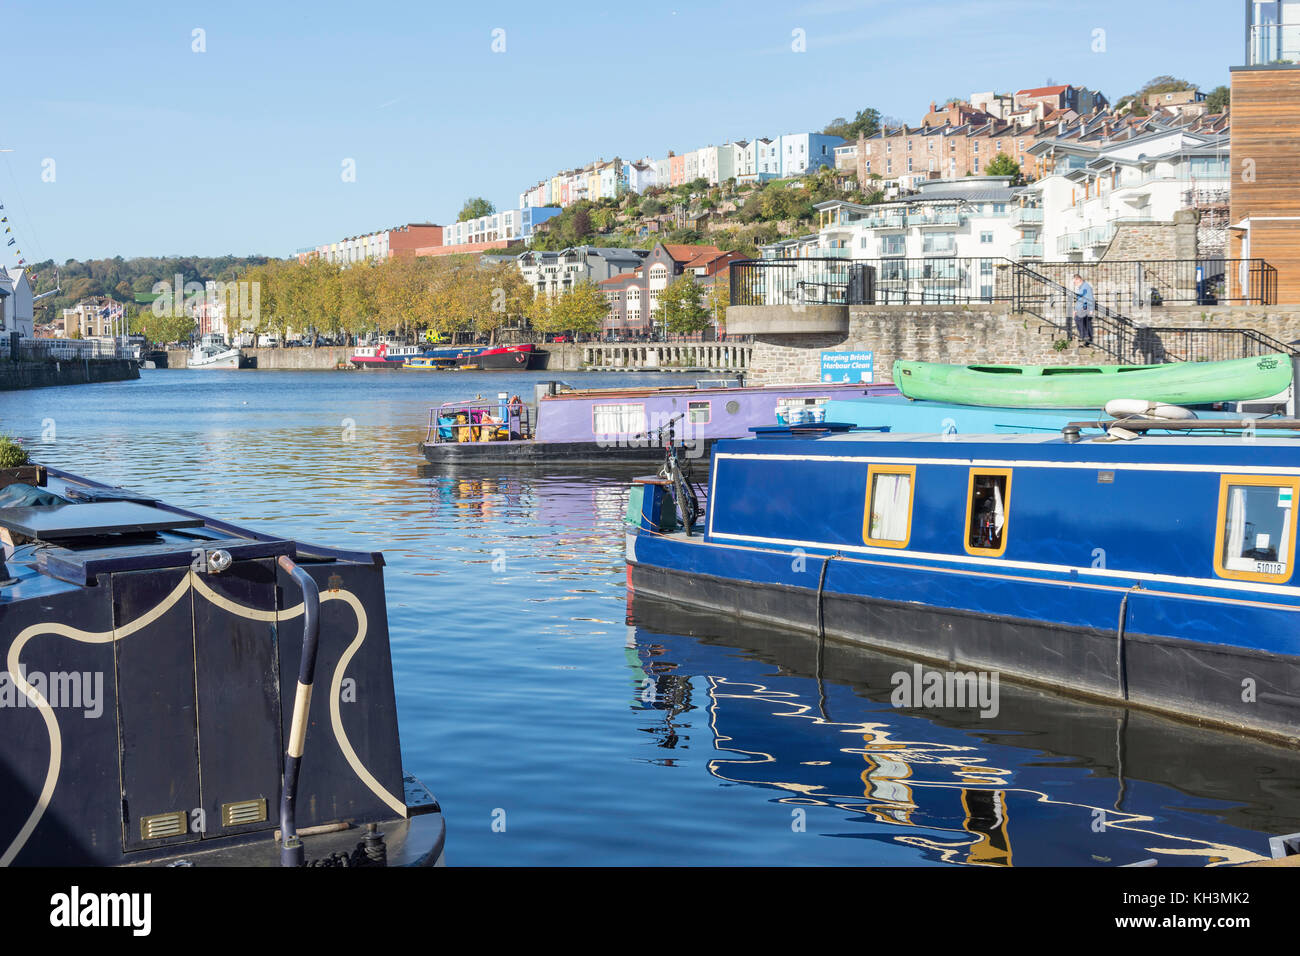 Canal boats moored in Floating Harbour, Bristol, England, United Kingdom Stock Photo